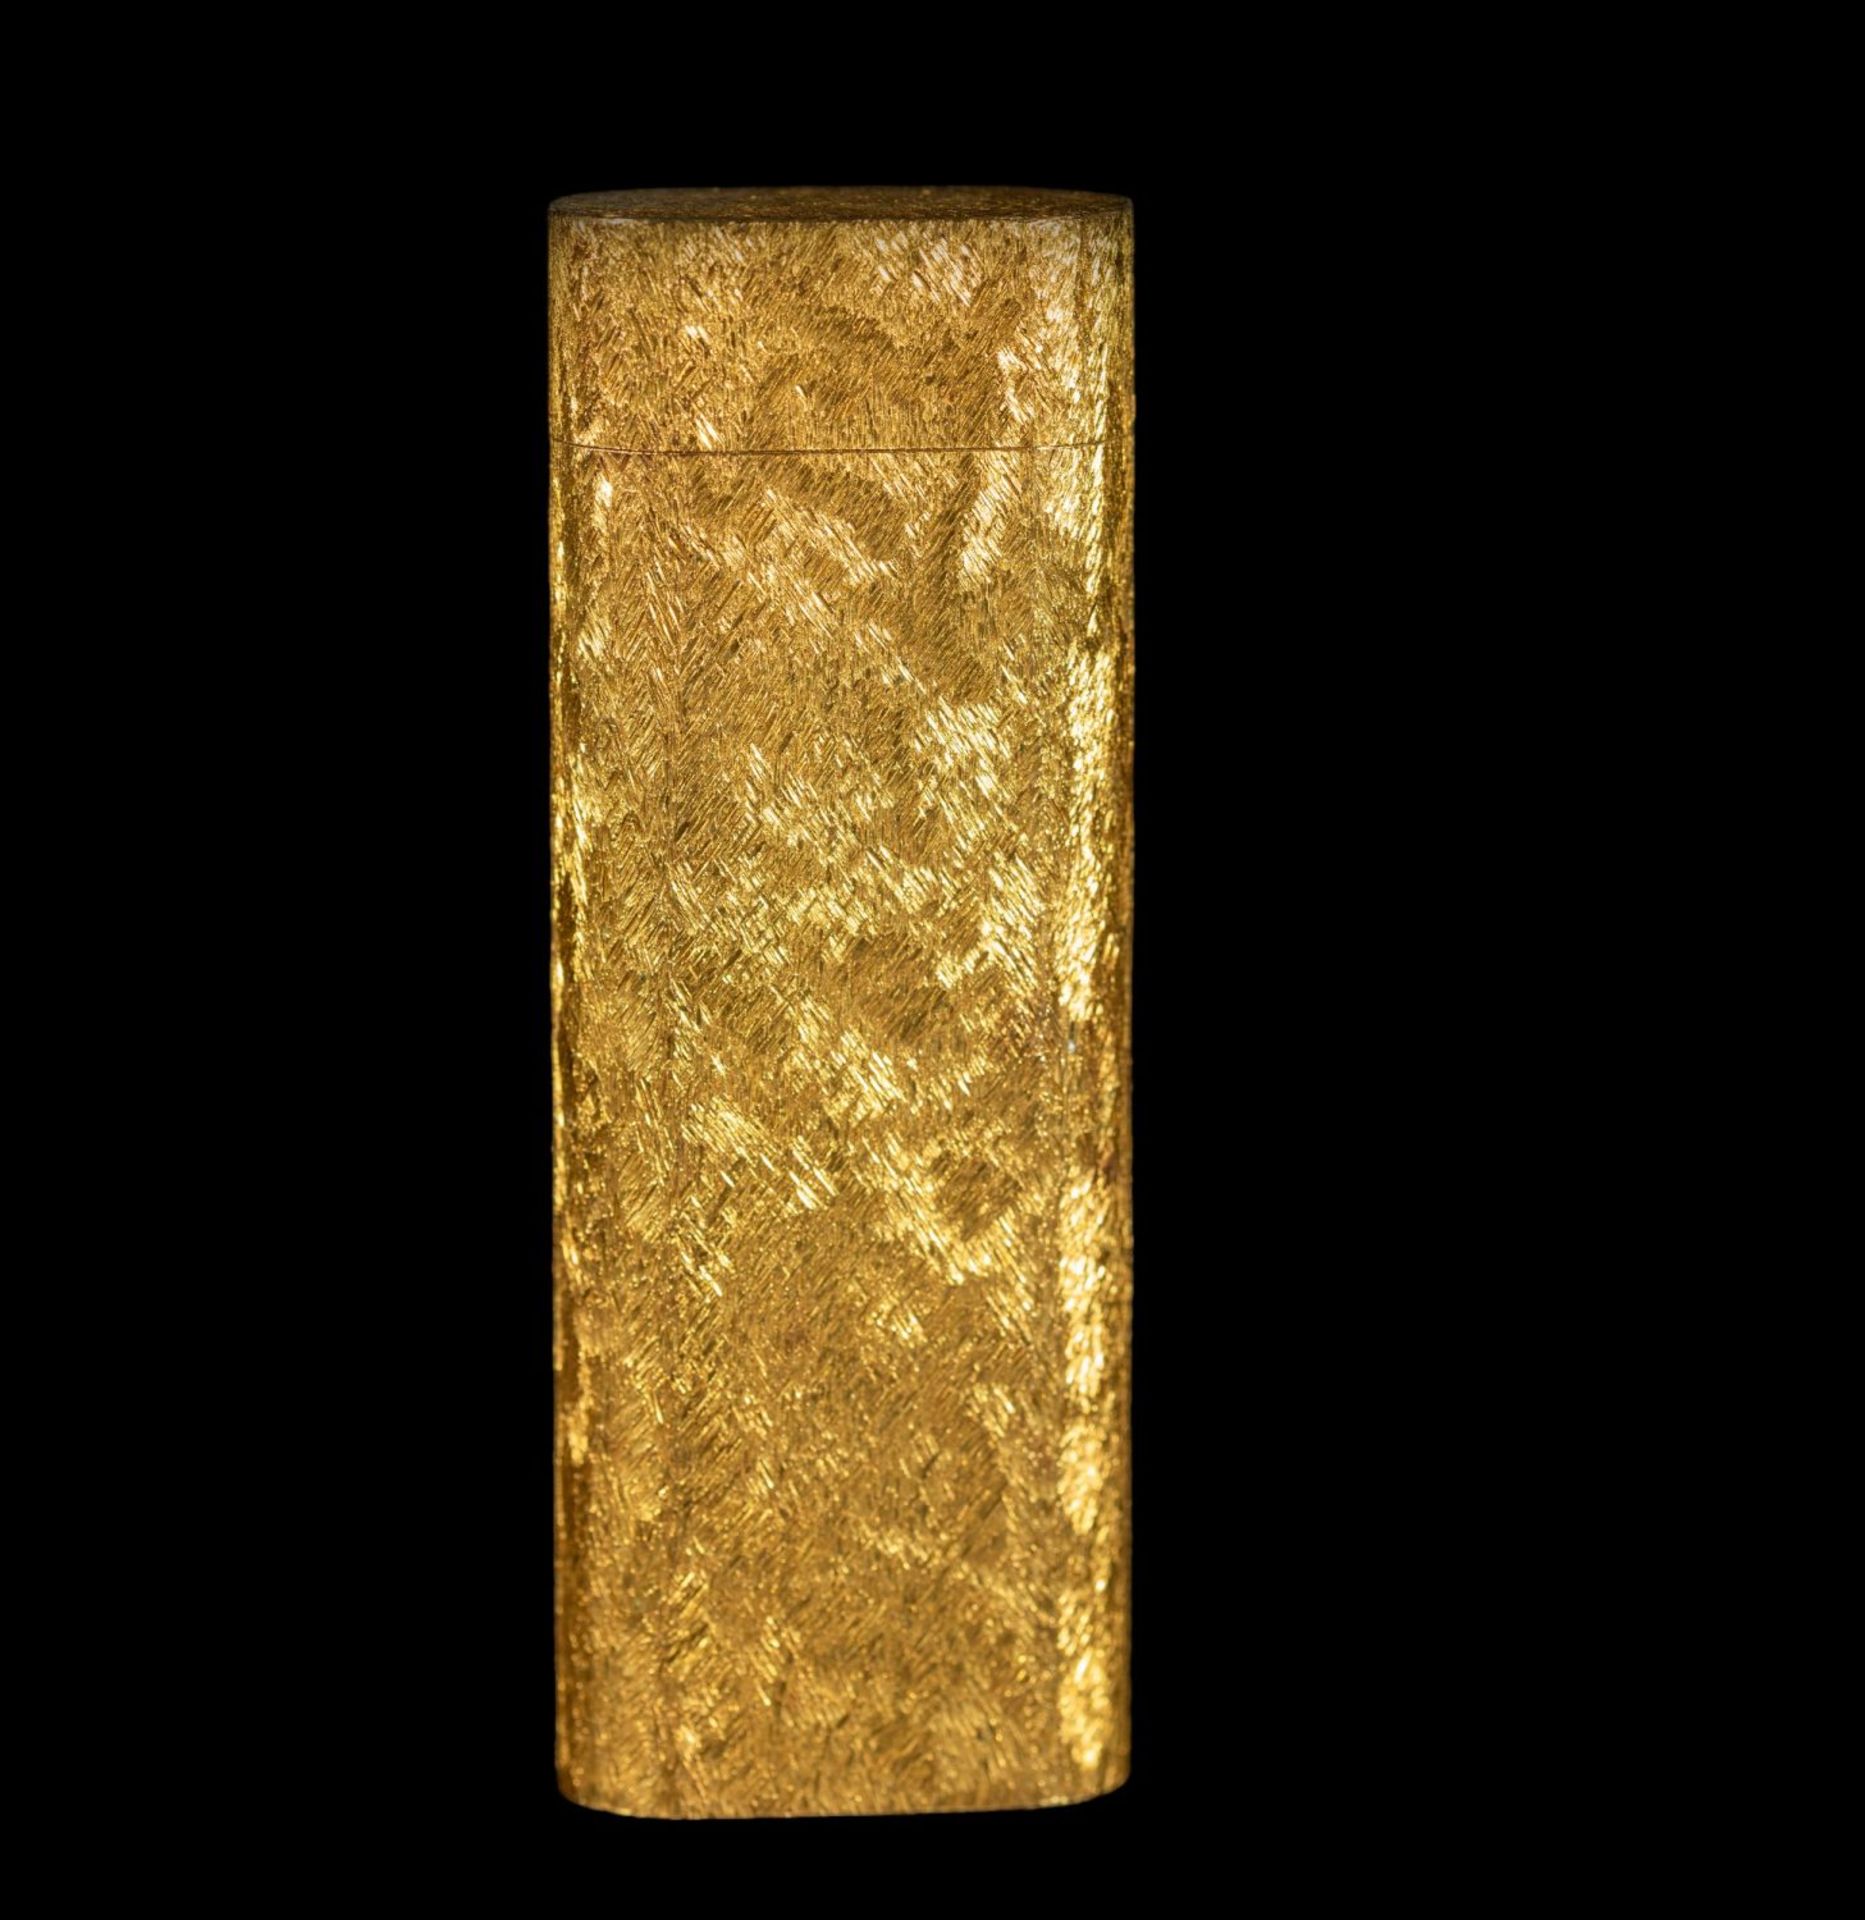 Cartier lighter in 20 micron gold plated, 1970s